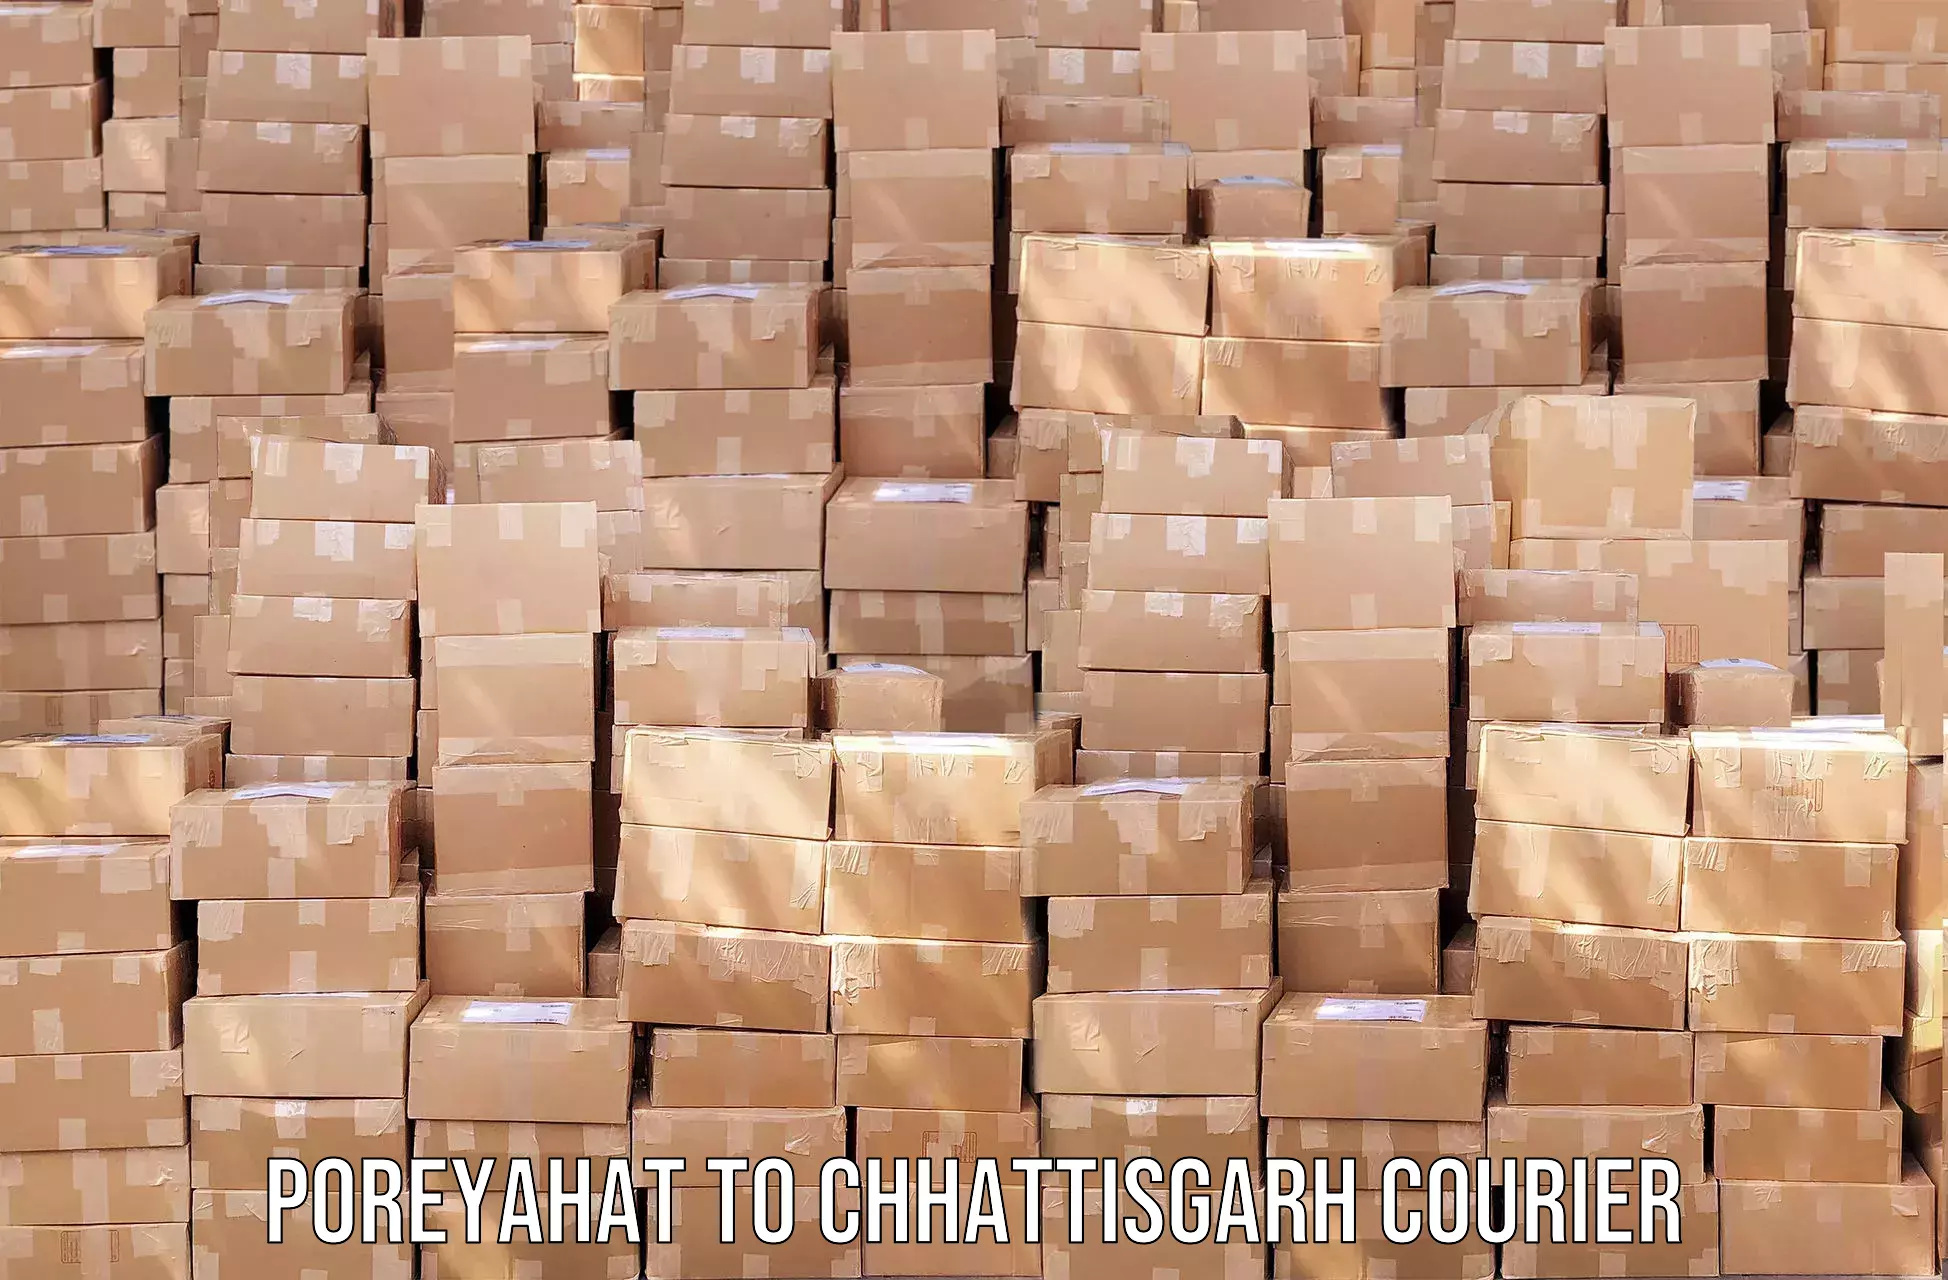 Efficient parcel tracking in Poreyahat to Raipur